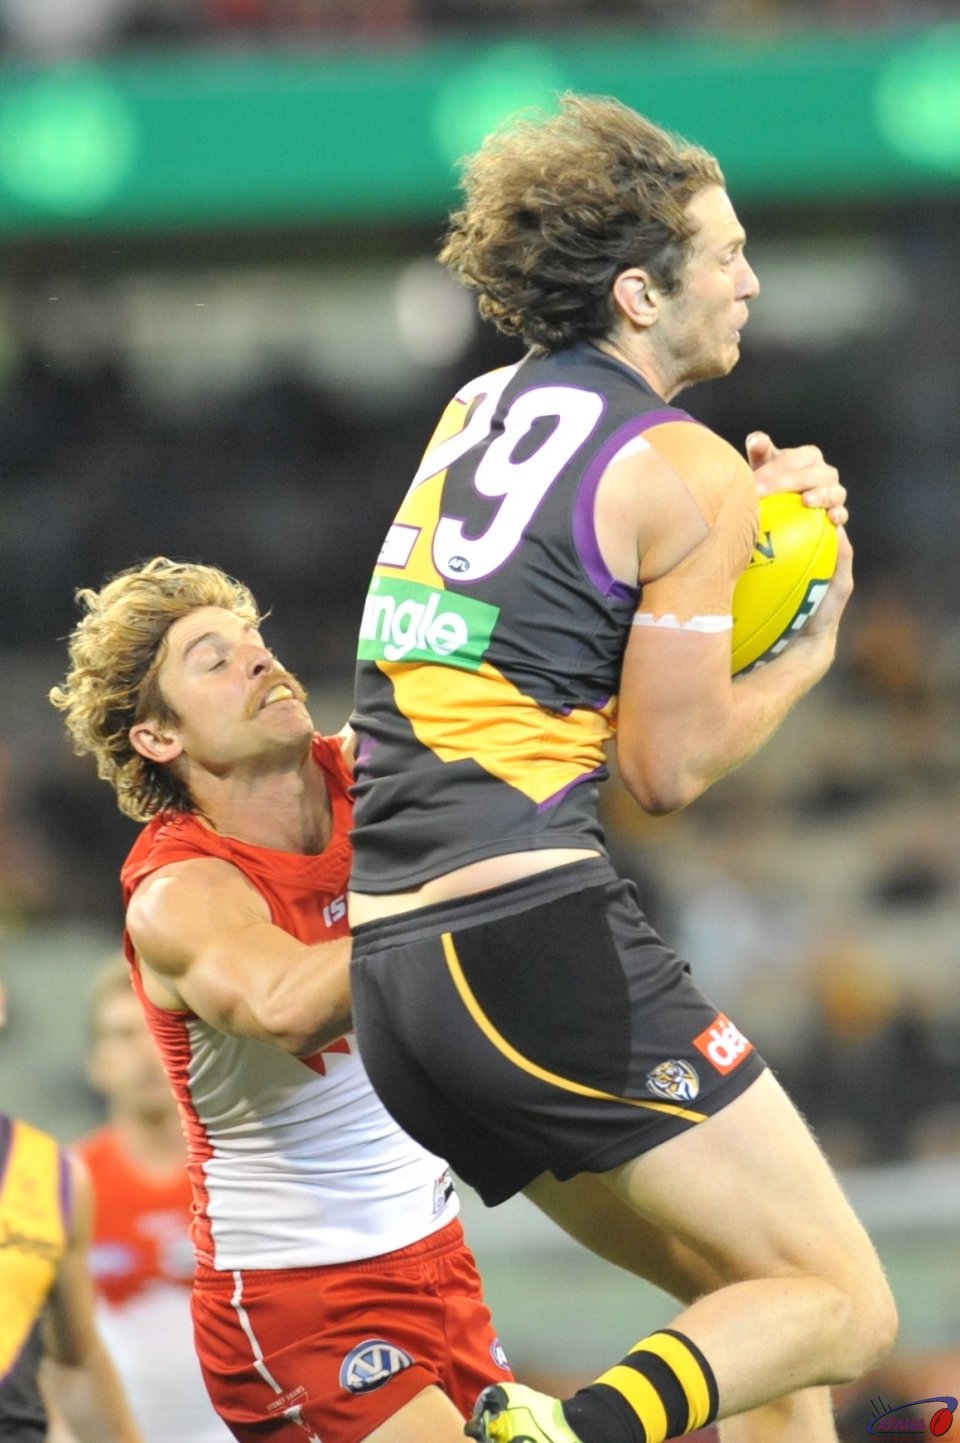 Tyrone Vickery takes a contested mark in the Tigers forward 50